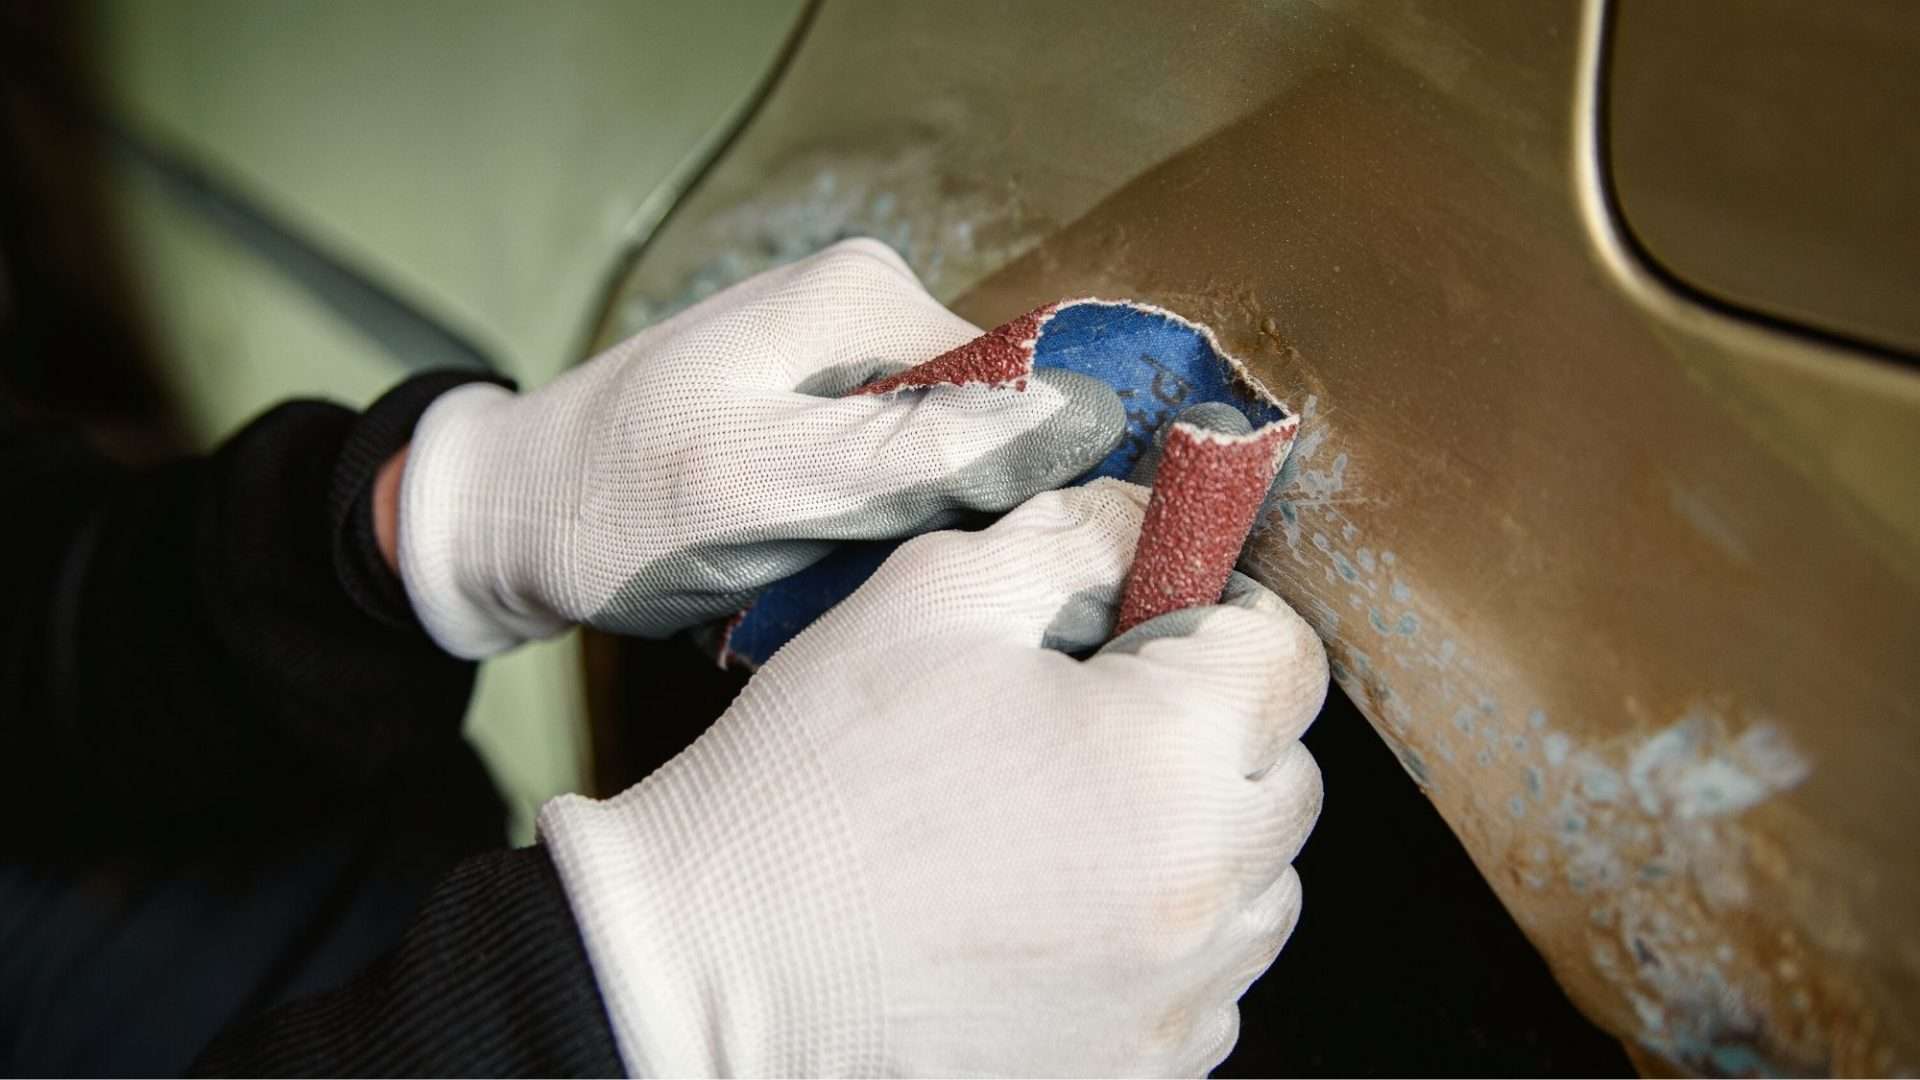 Removing rust from vehicle with sandpaper